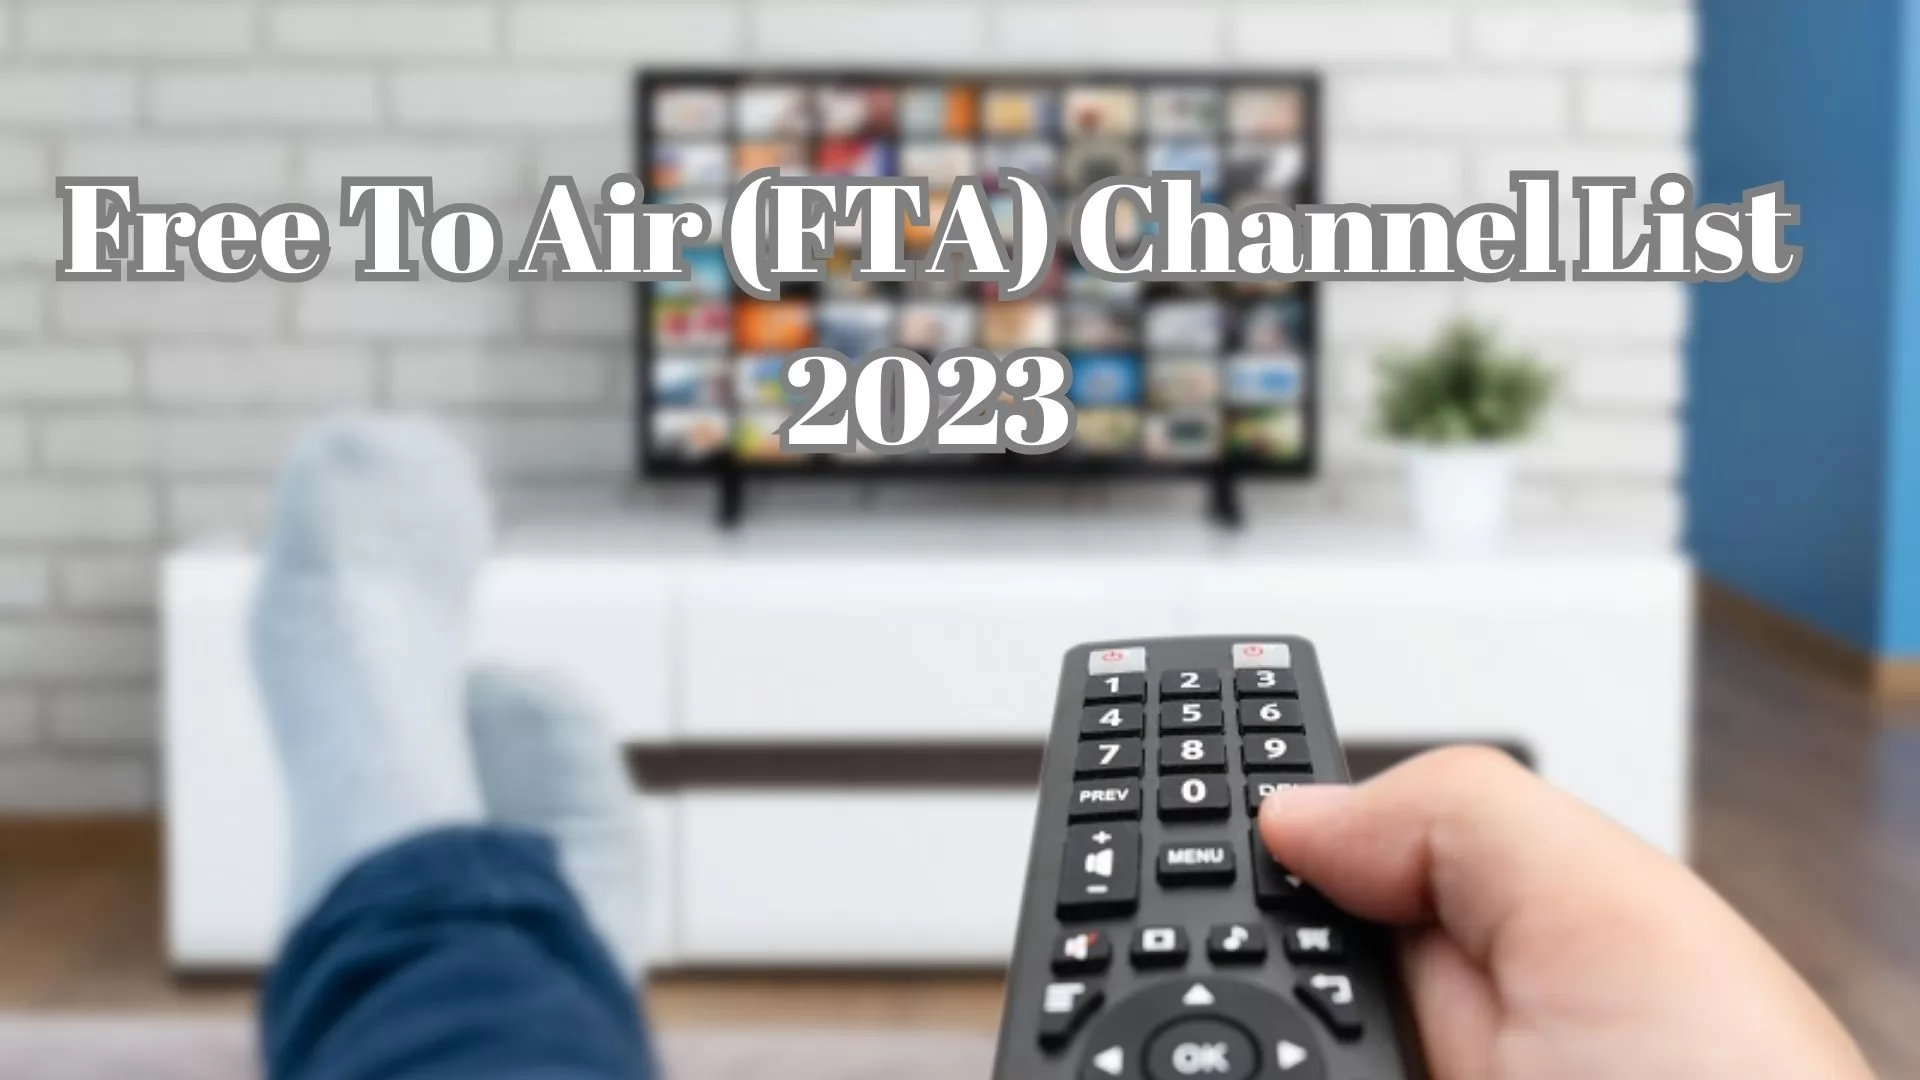 Free-To-Air (FTA) Channel List 2023